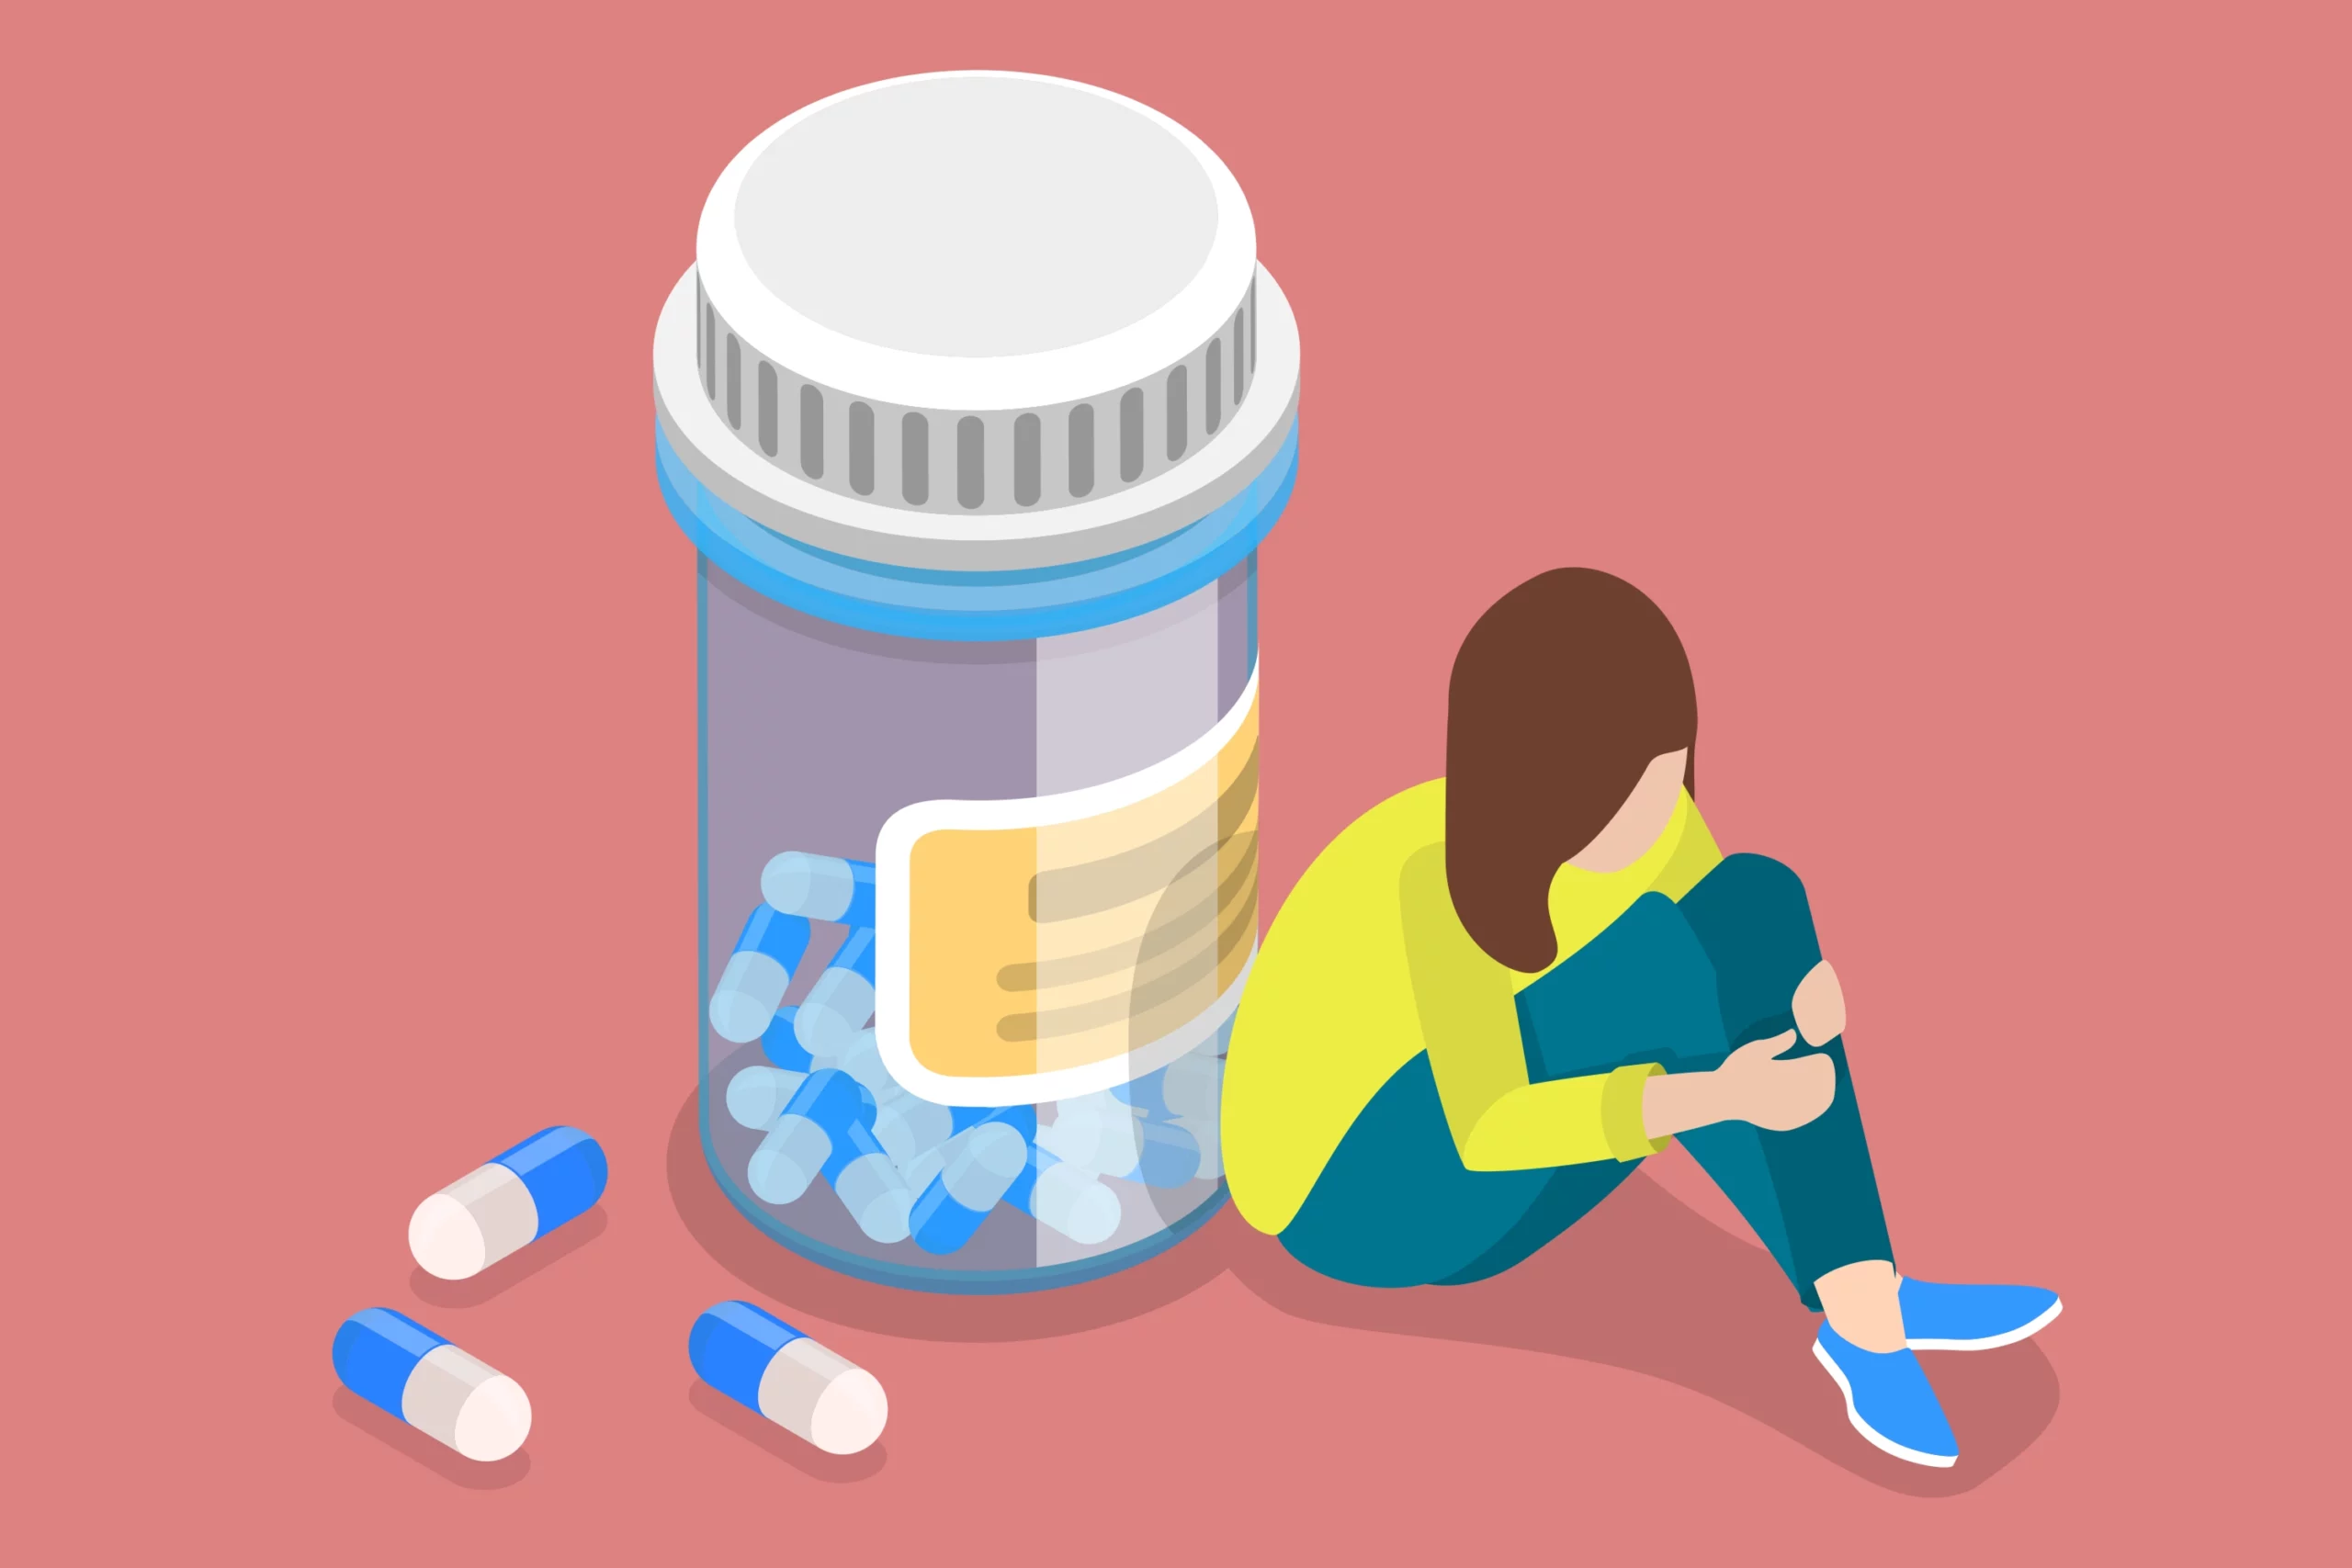 This brief article explains the difference between drug abuse vs. drug misuse, the dangers of both, and which can lead to addiction.